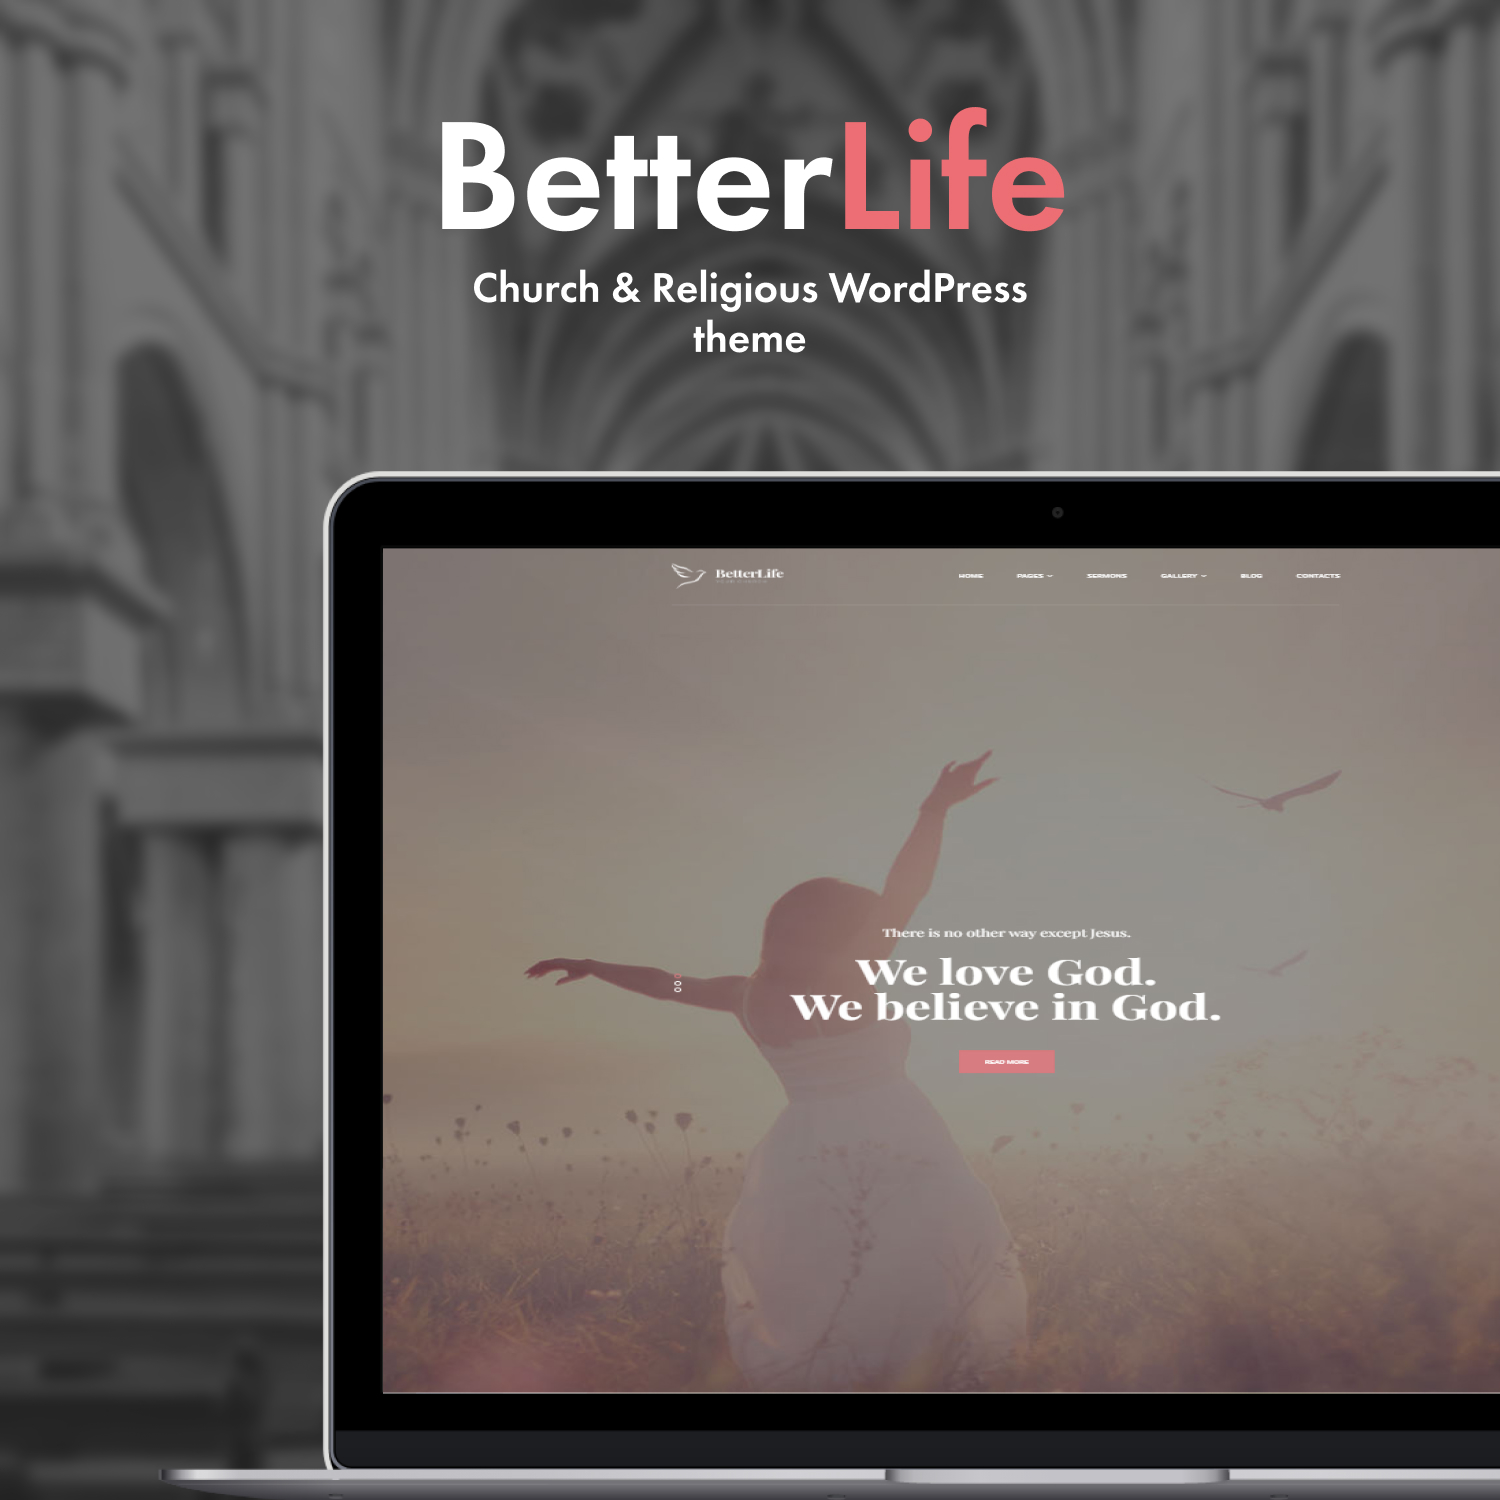 Images with betterlife church religious wordpress theme.